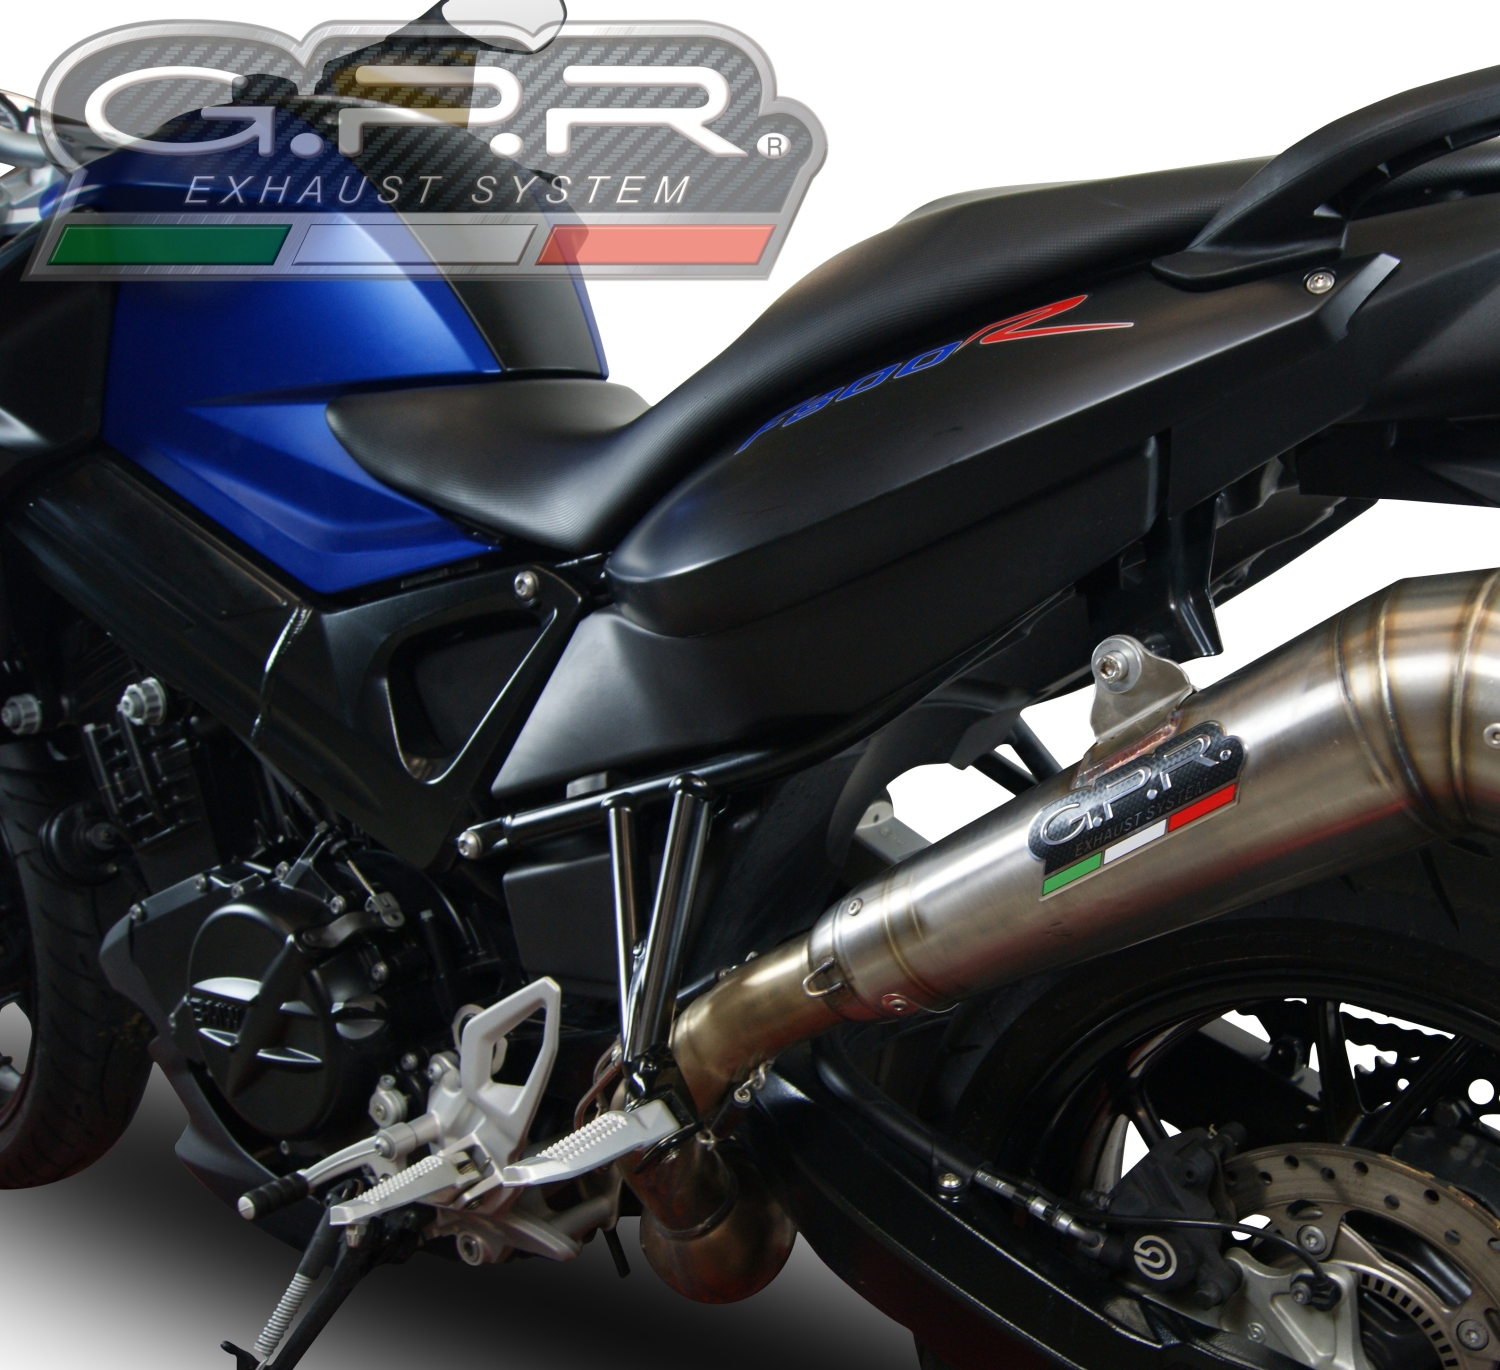 Exhaust system compatible with Bmw F 800 R 2015-2016, Powercone Evo, Homologated legal slip-on exhaust including removable db killer and link pipe 